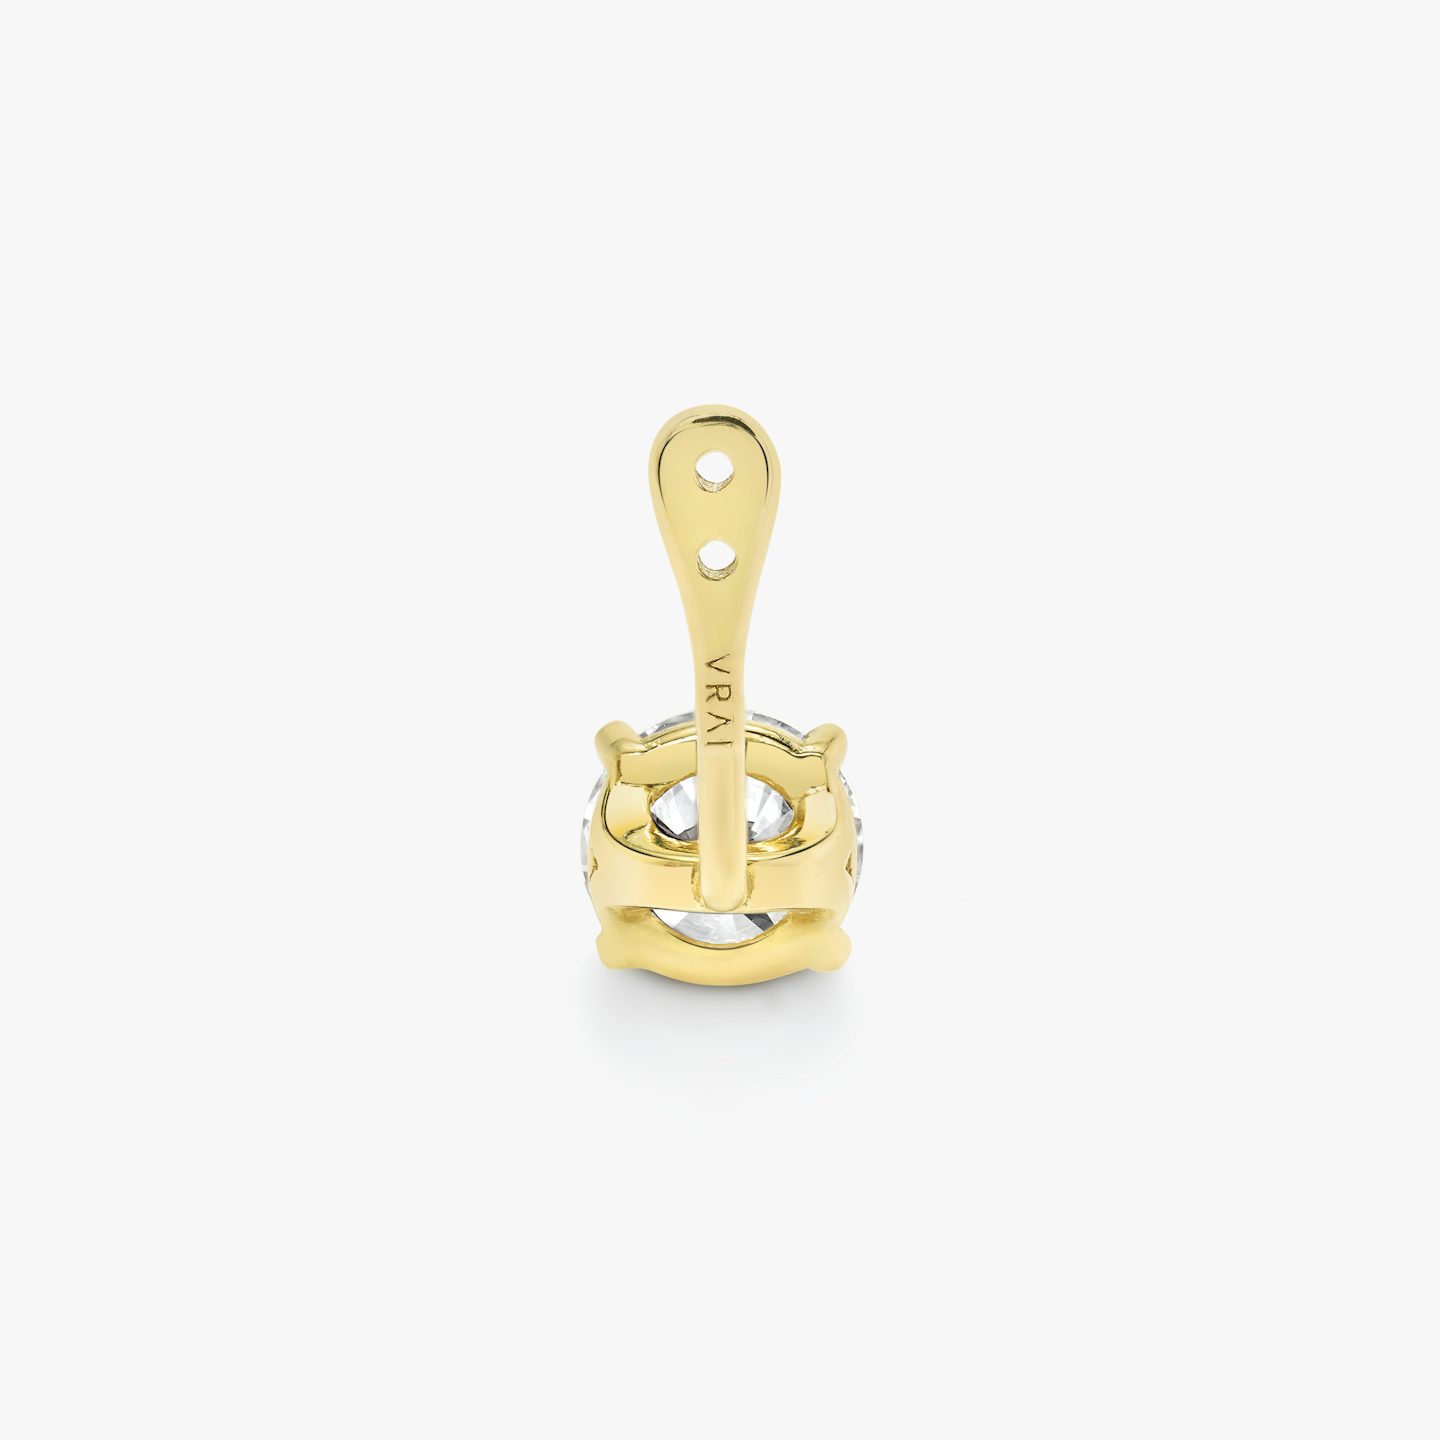 VRAI Solitaire Drop Ear Jacket | Round Brilliant | 14k | 18k Yellow Gold | Carat weight: 1